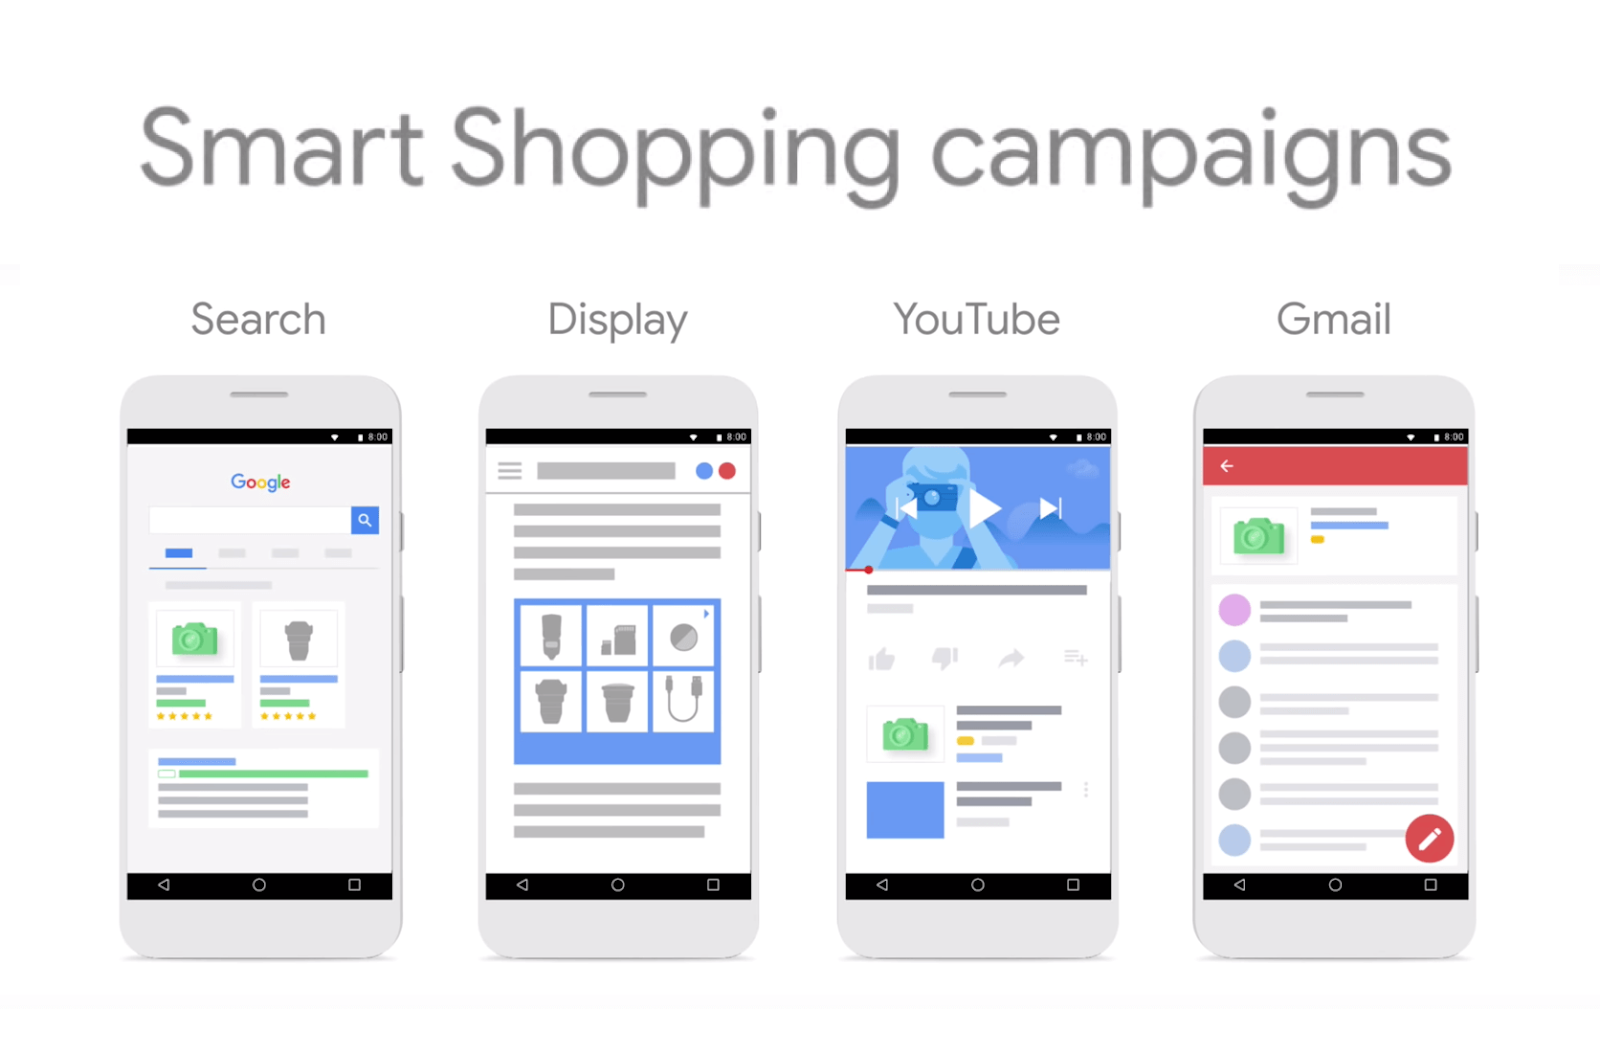 Smart shopping campaigns on a different platform